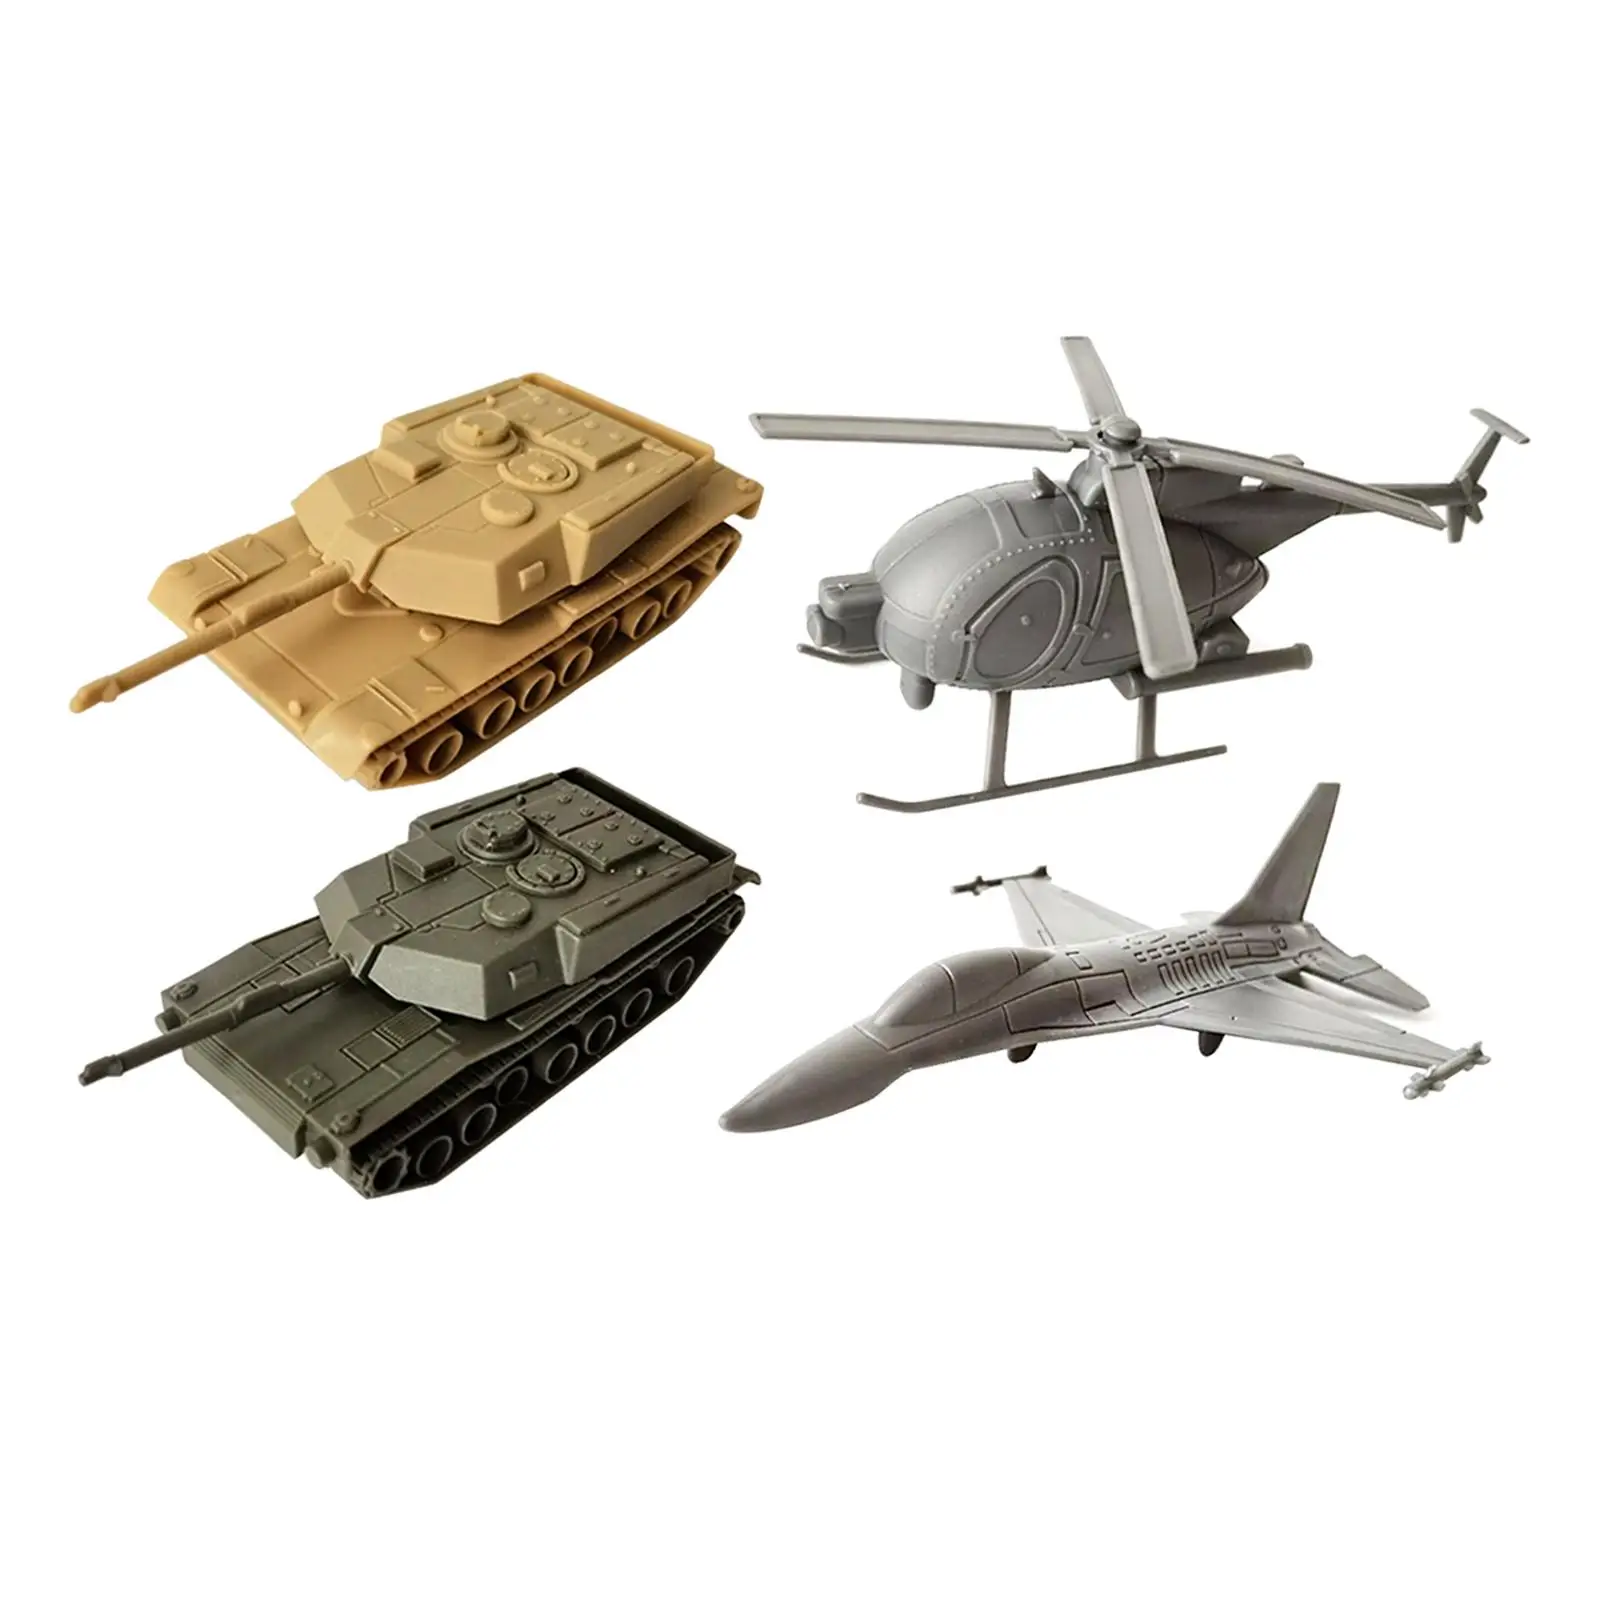 4 Pieces 3D Puzzles Helicopter and Fighter Model Toy Building Kits 4D Modern Tank and Aircraft for Kids Keepsake Tabletop Decor